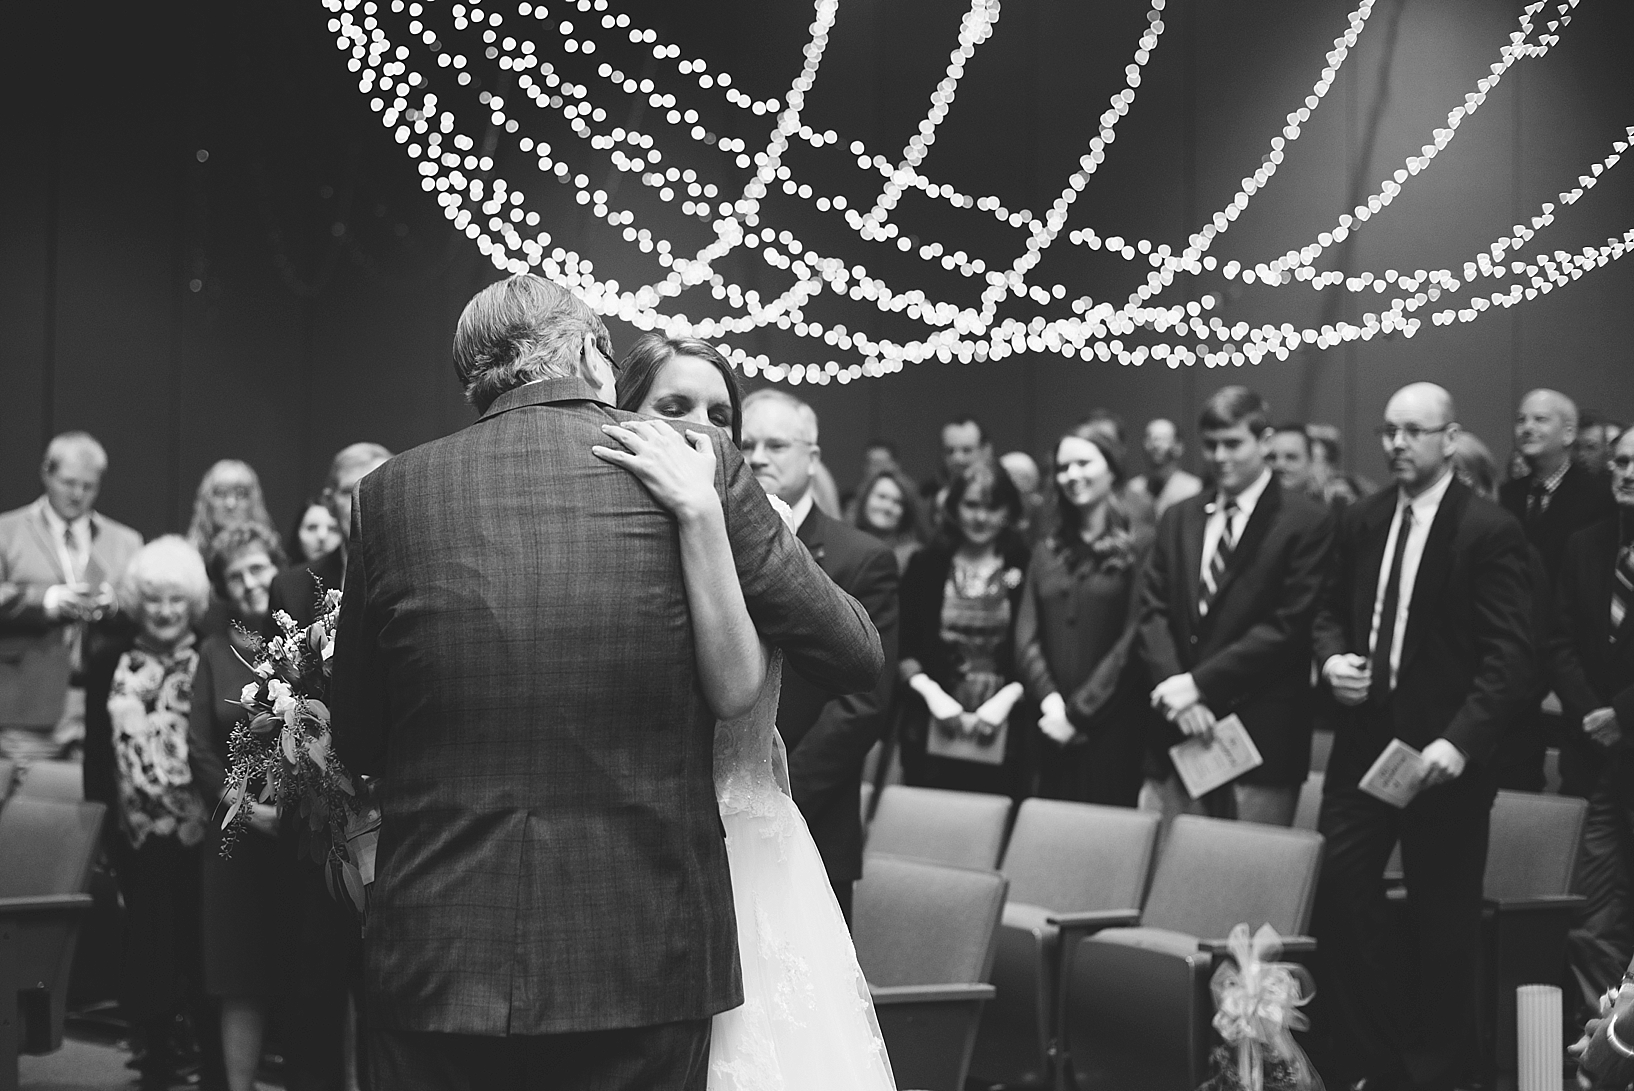 father hugging bride at front of church with string lights in the background